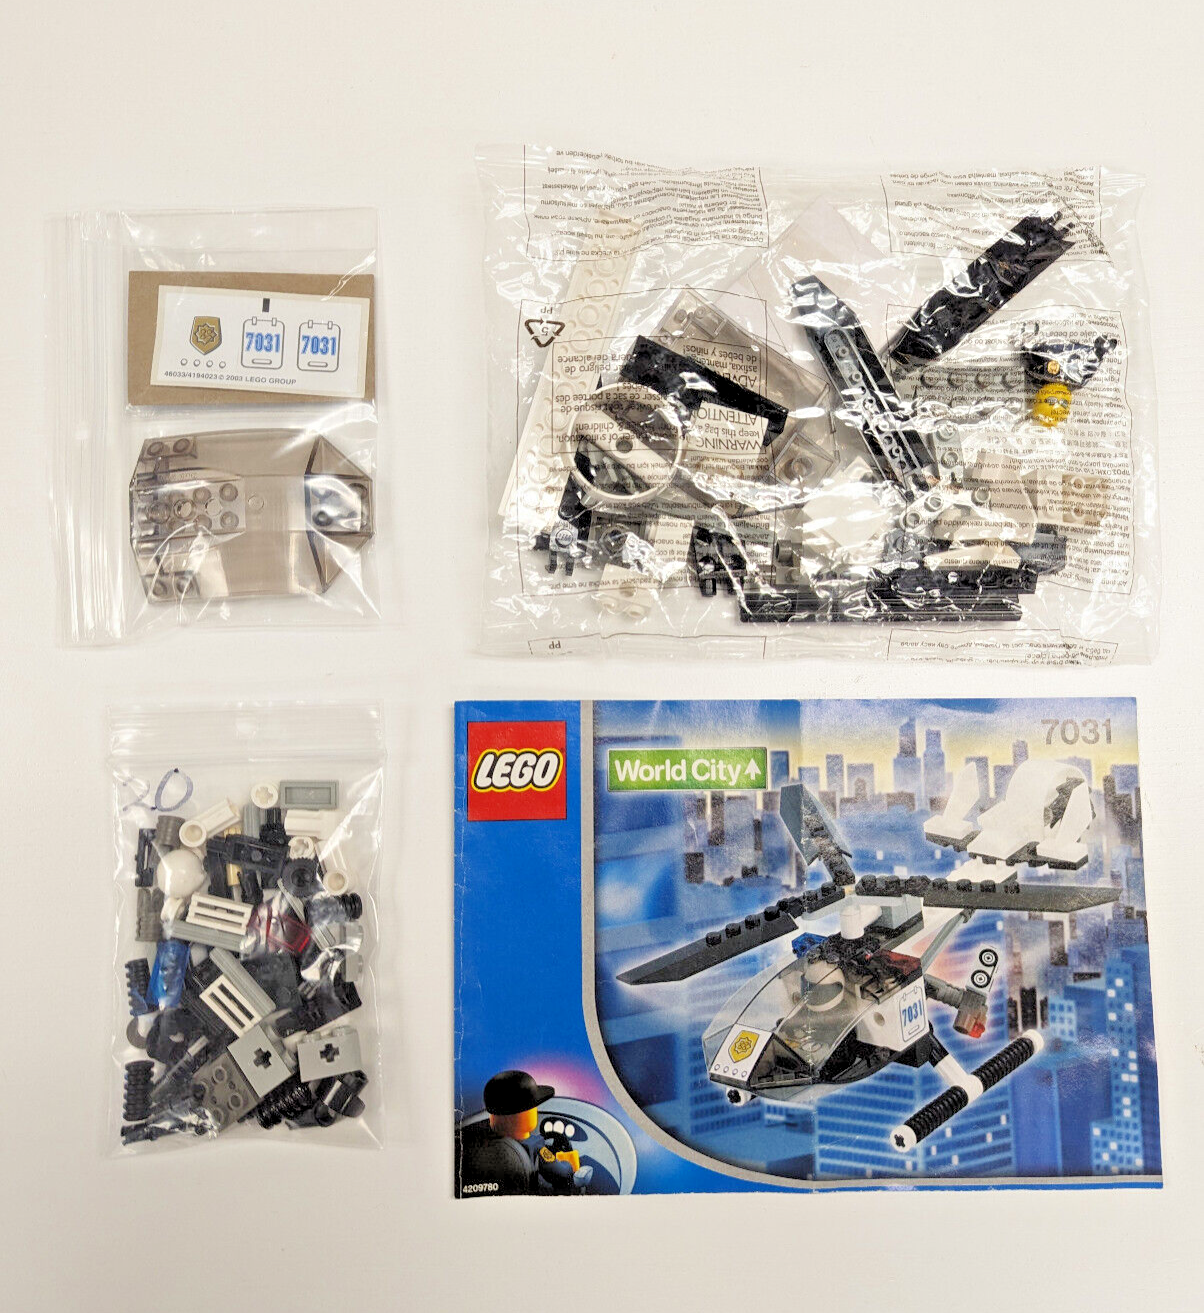 NEW Vintage Lego World City 7031 - Police Helicopter Pilot - No Box (wc008)